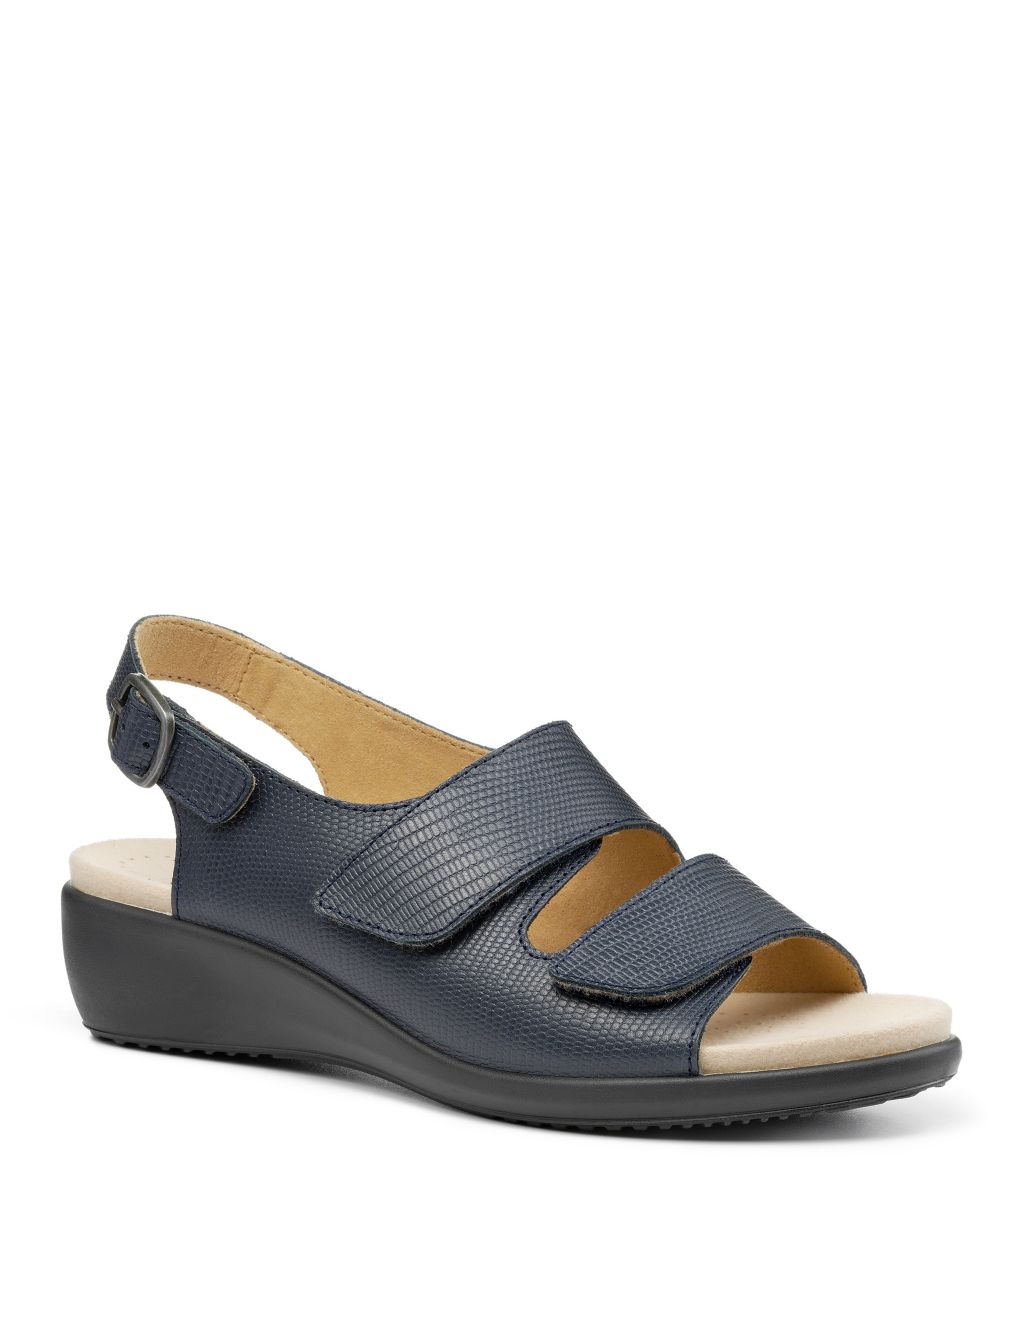 Easy II Wide Fit Leather Wedge Sandals image 3